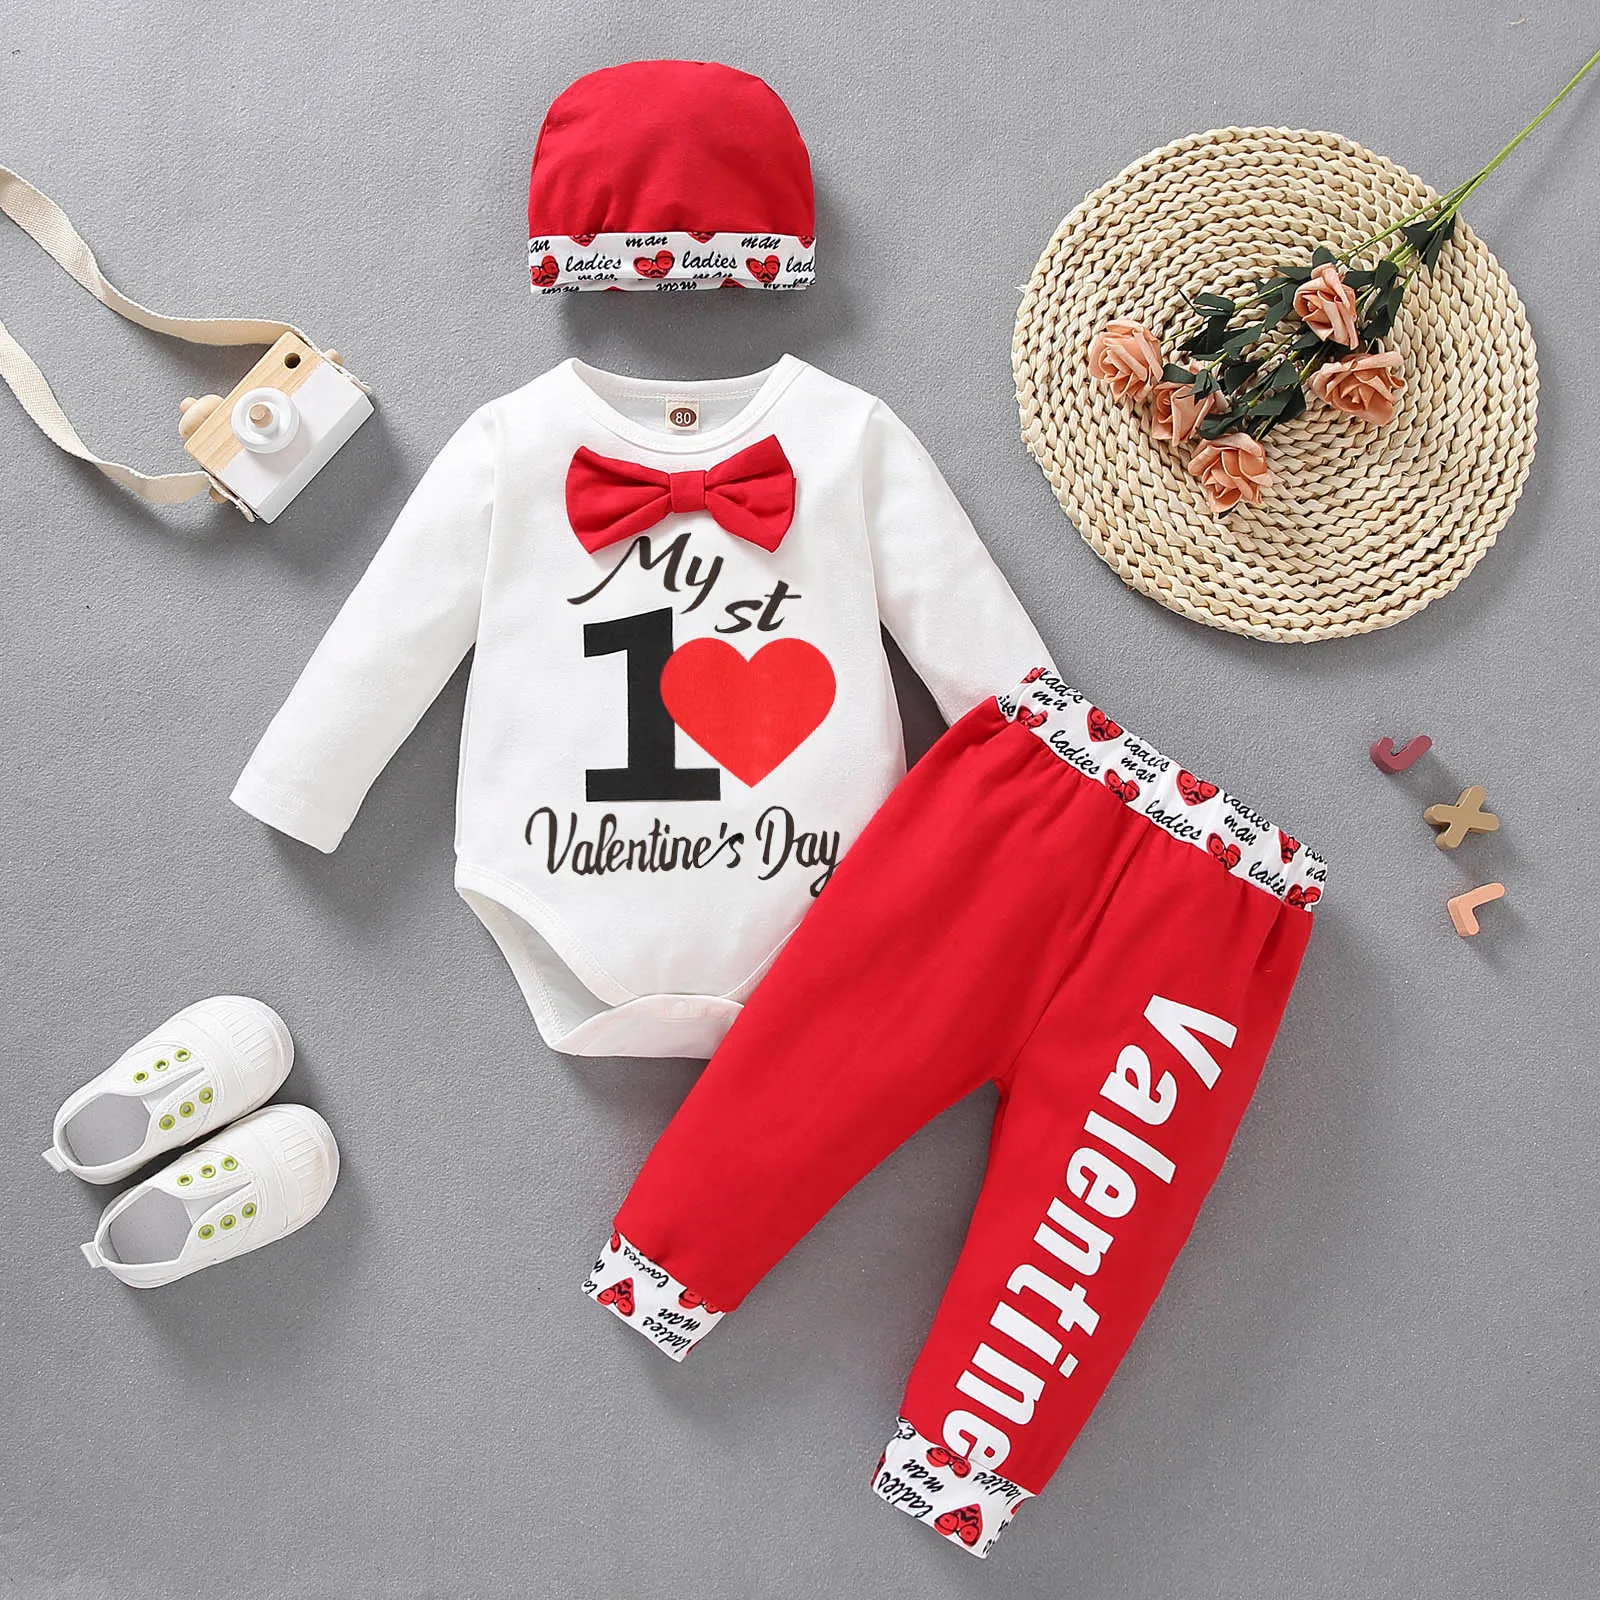 0M-24M Newborn Infant Baby Boy Girl Valentine's Day Letter Romper Bodysuit Hearts Pants Long Sleeve Outfits Baby Clothes Set